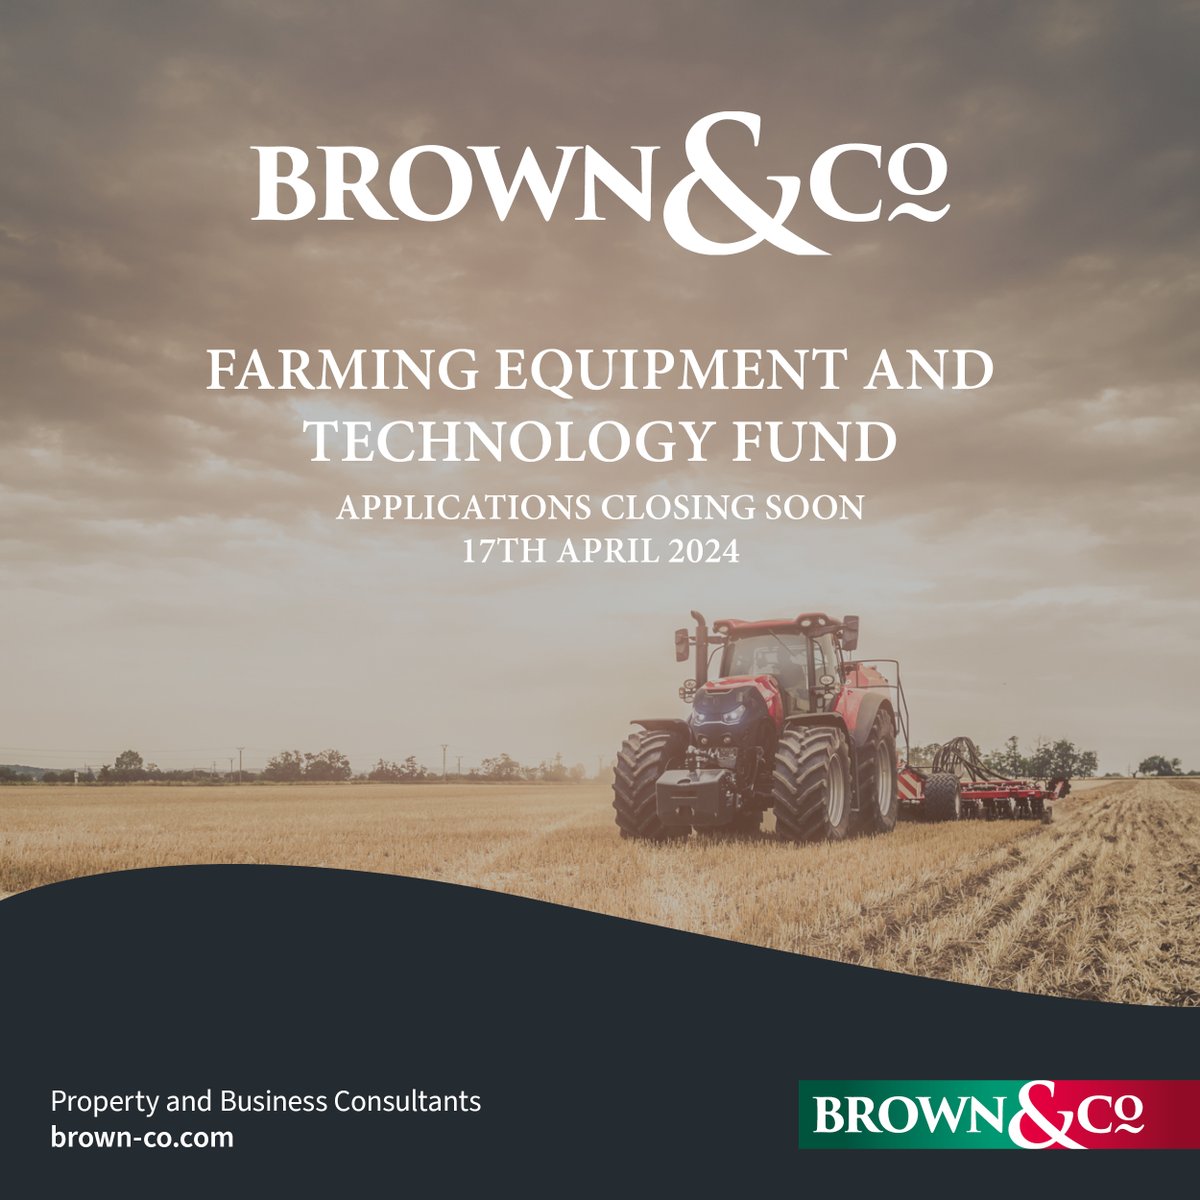 Just six days left to apply for the Farming Equipment and Technology Fund. The closing date for applications is the 17th April 2024. Contact your local office to find out more: bit.ly/44IDVv4